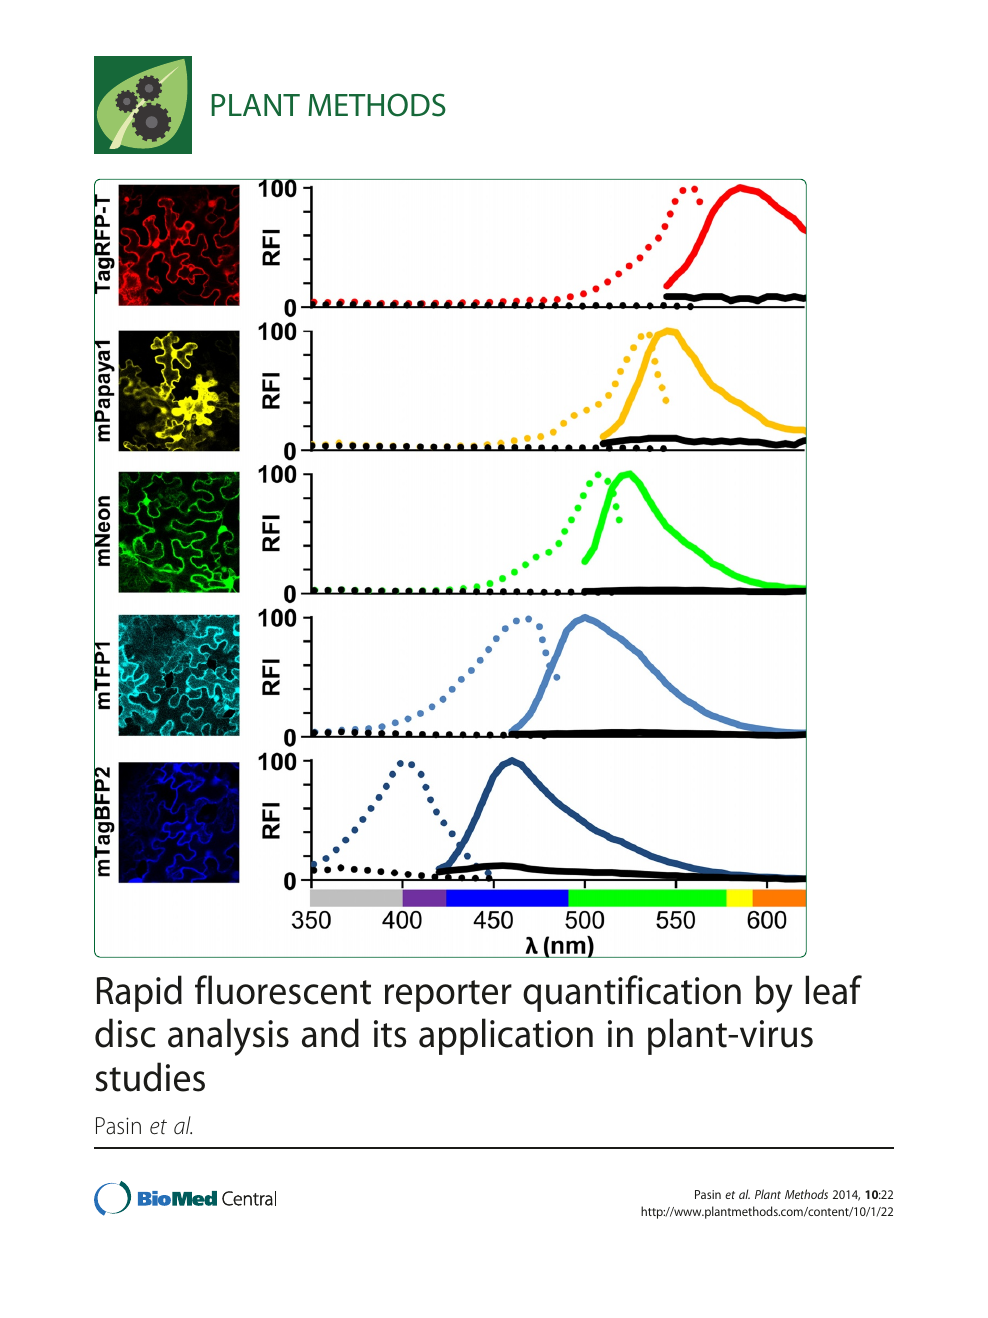 Immagini Natale 400 X 150 Pixel.Rapid Fluorescent Reporter Quantification By Leaf Disc Analysis And Its Application In Plant Virus Studies Topic Of Research Paper In Biological Sciences Download Scholarly Article Pdf And Read For Free On Cyberleninka